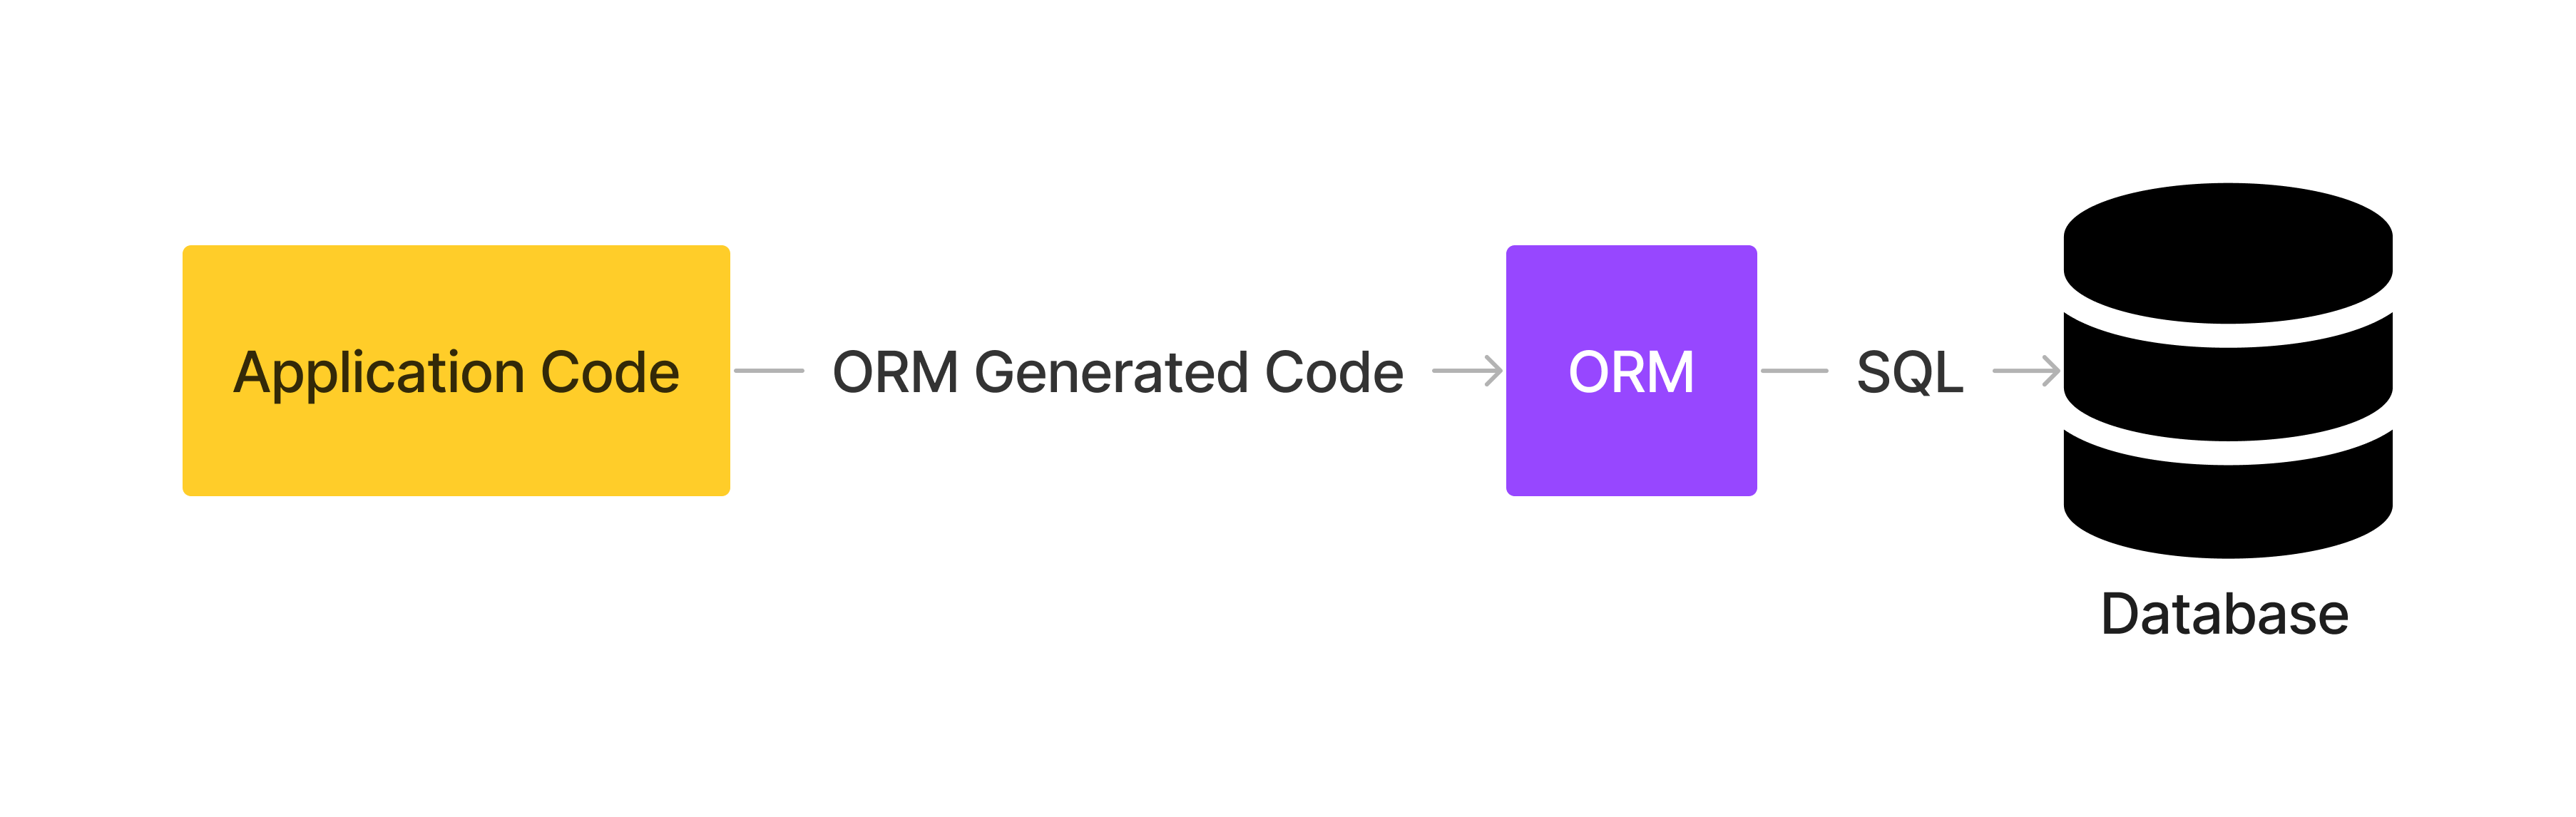 ORMs generates code used in application code that helps developers easily execute SQL queries